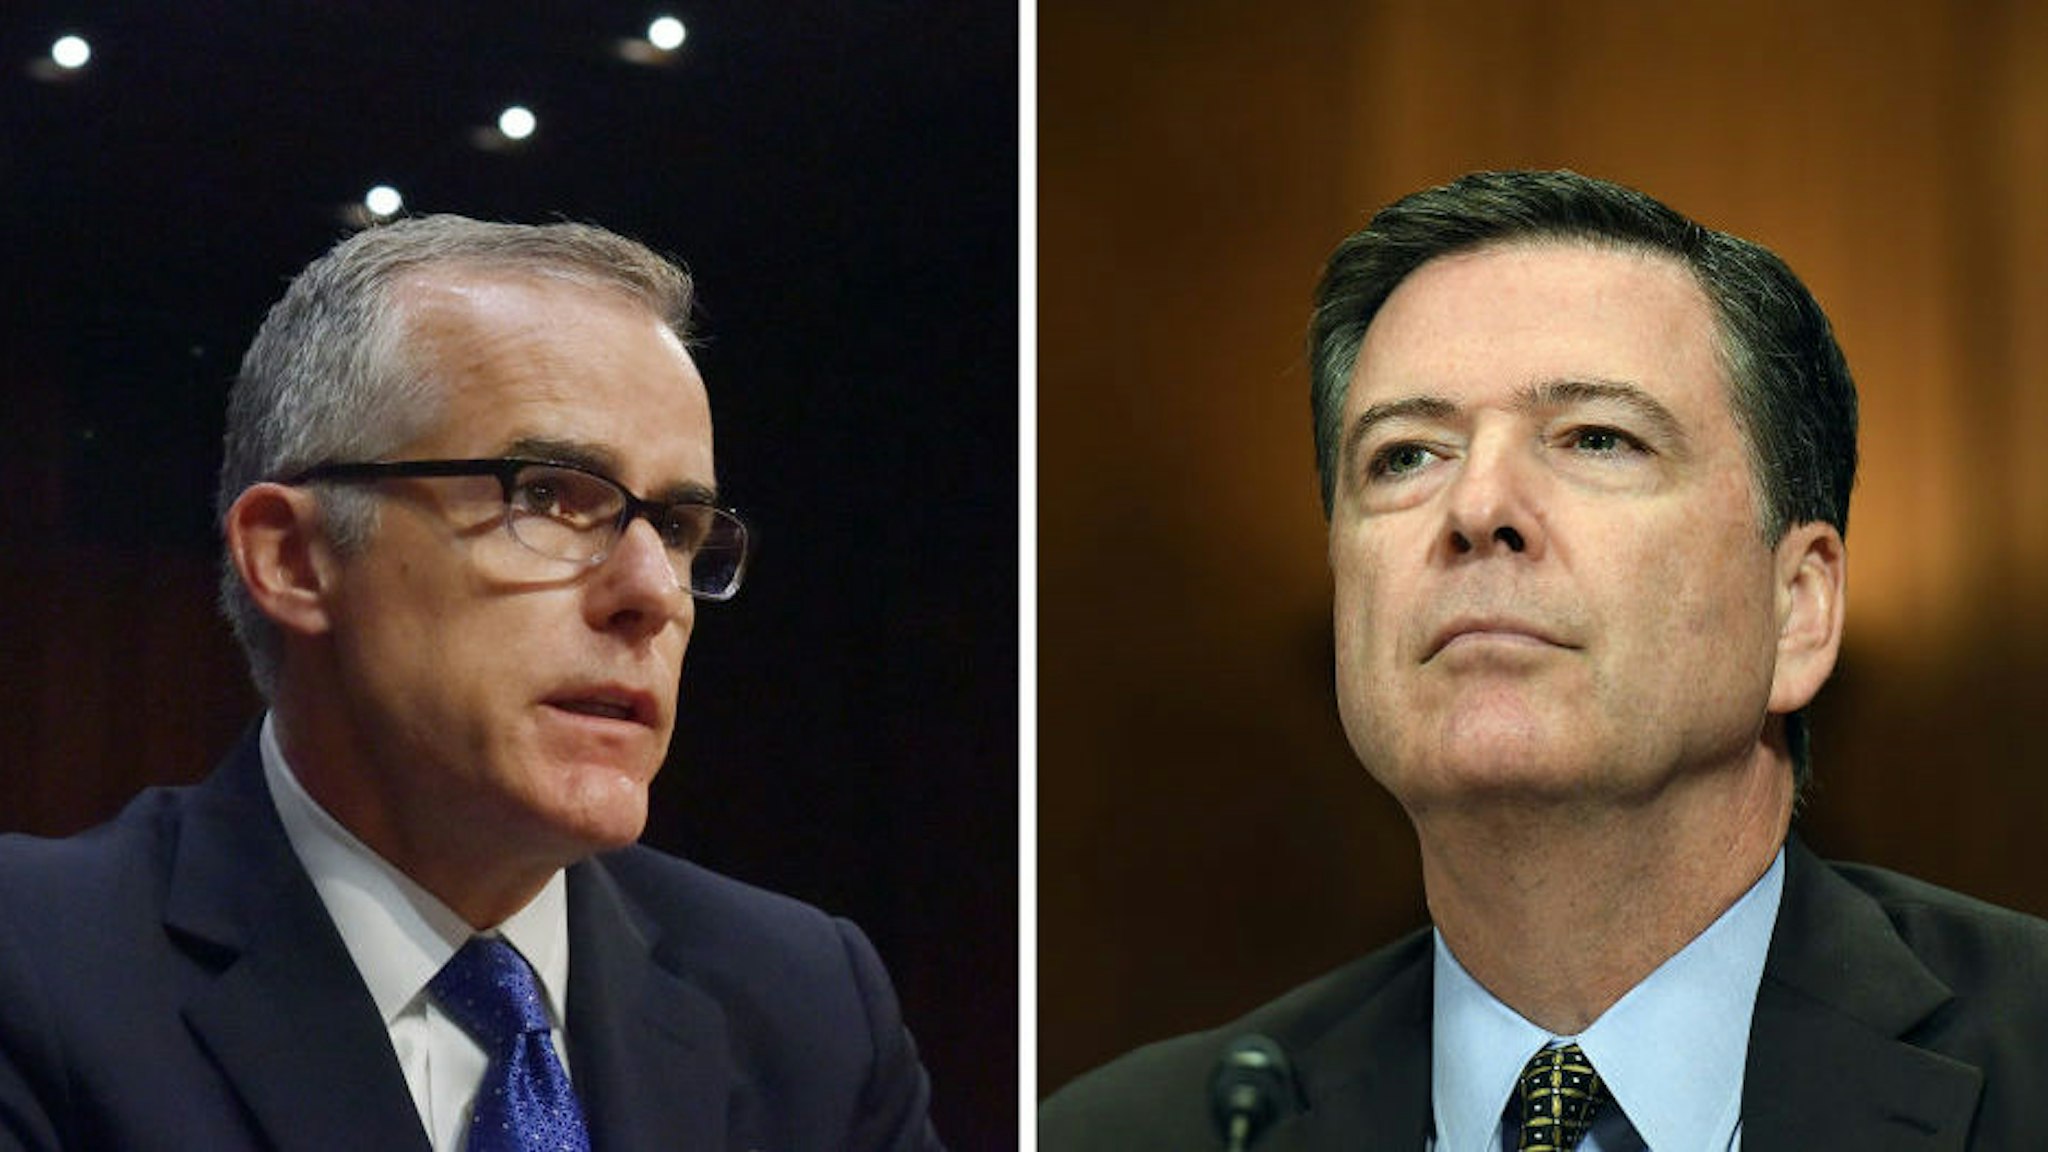 Andrew McCabe, left, and James Comey. (Photos by Jahi Chikwendiu/The Washington Post via Getty Images; Matt McClain/The Washington Post via Getty Images)